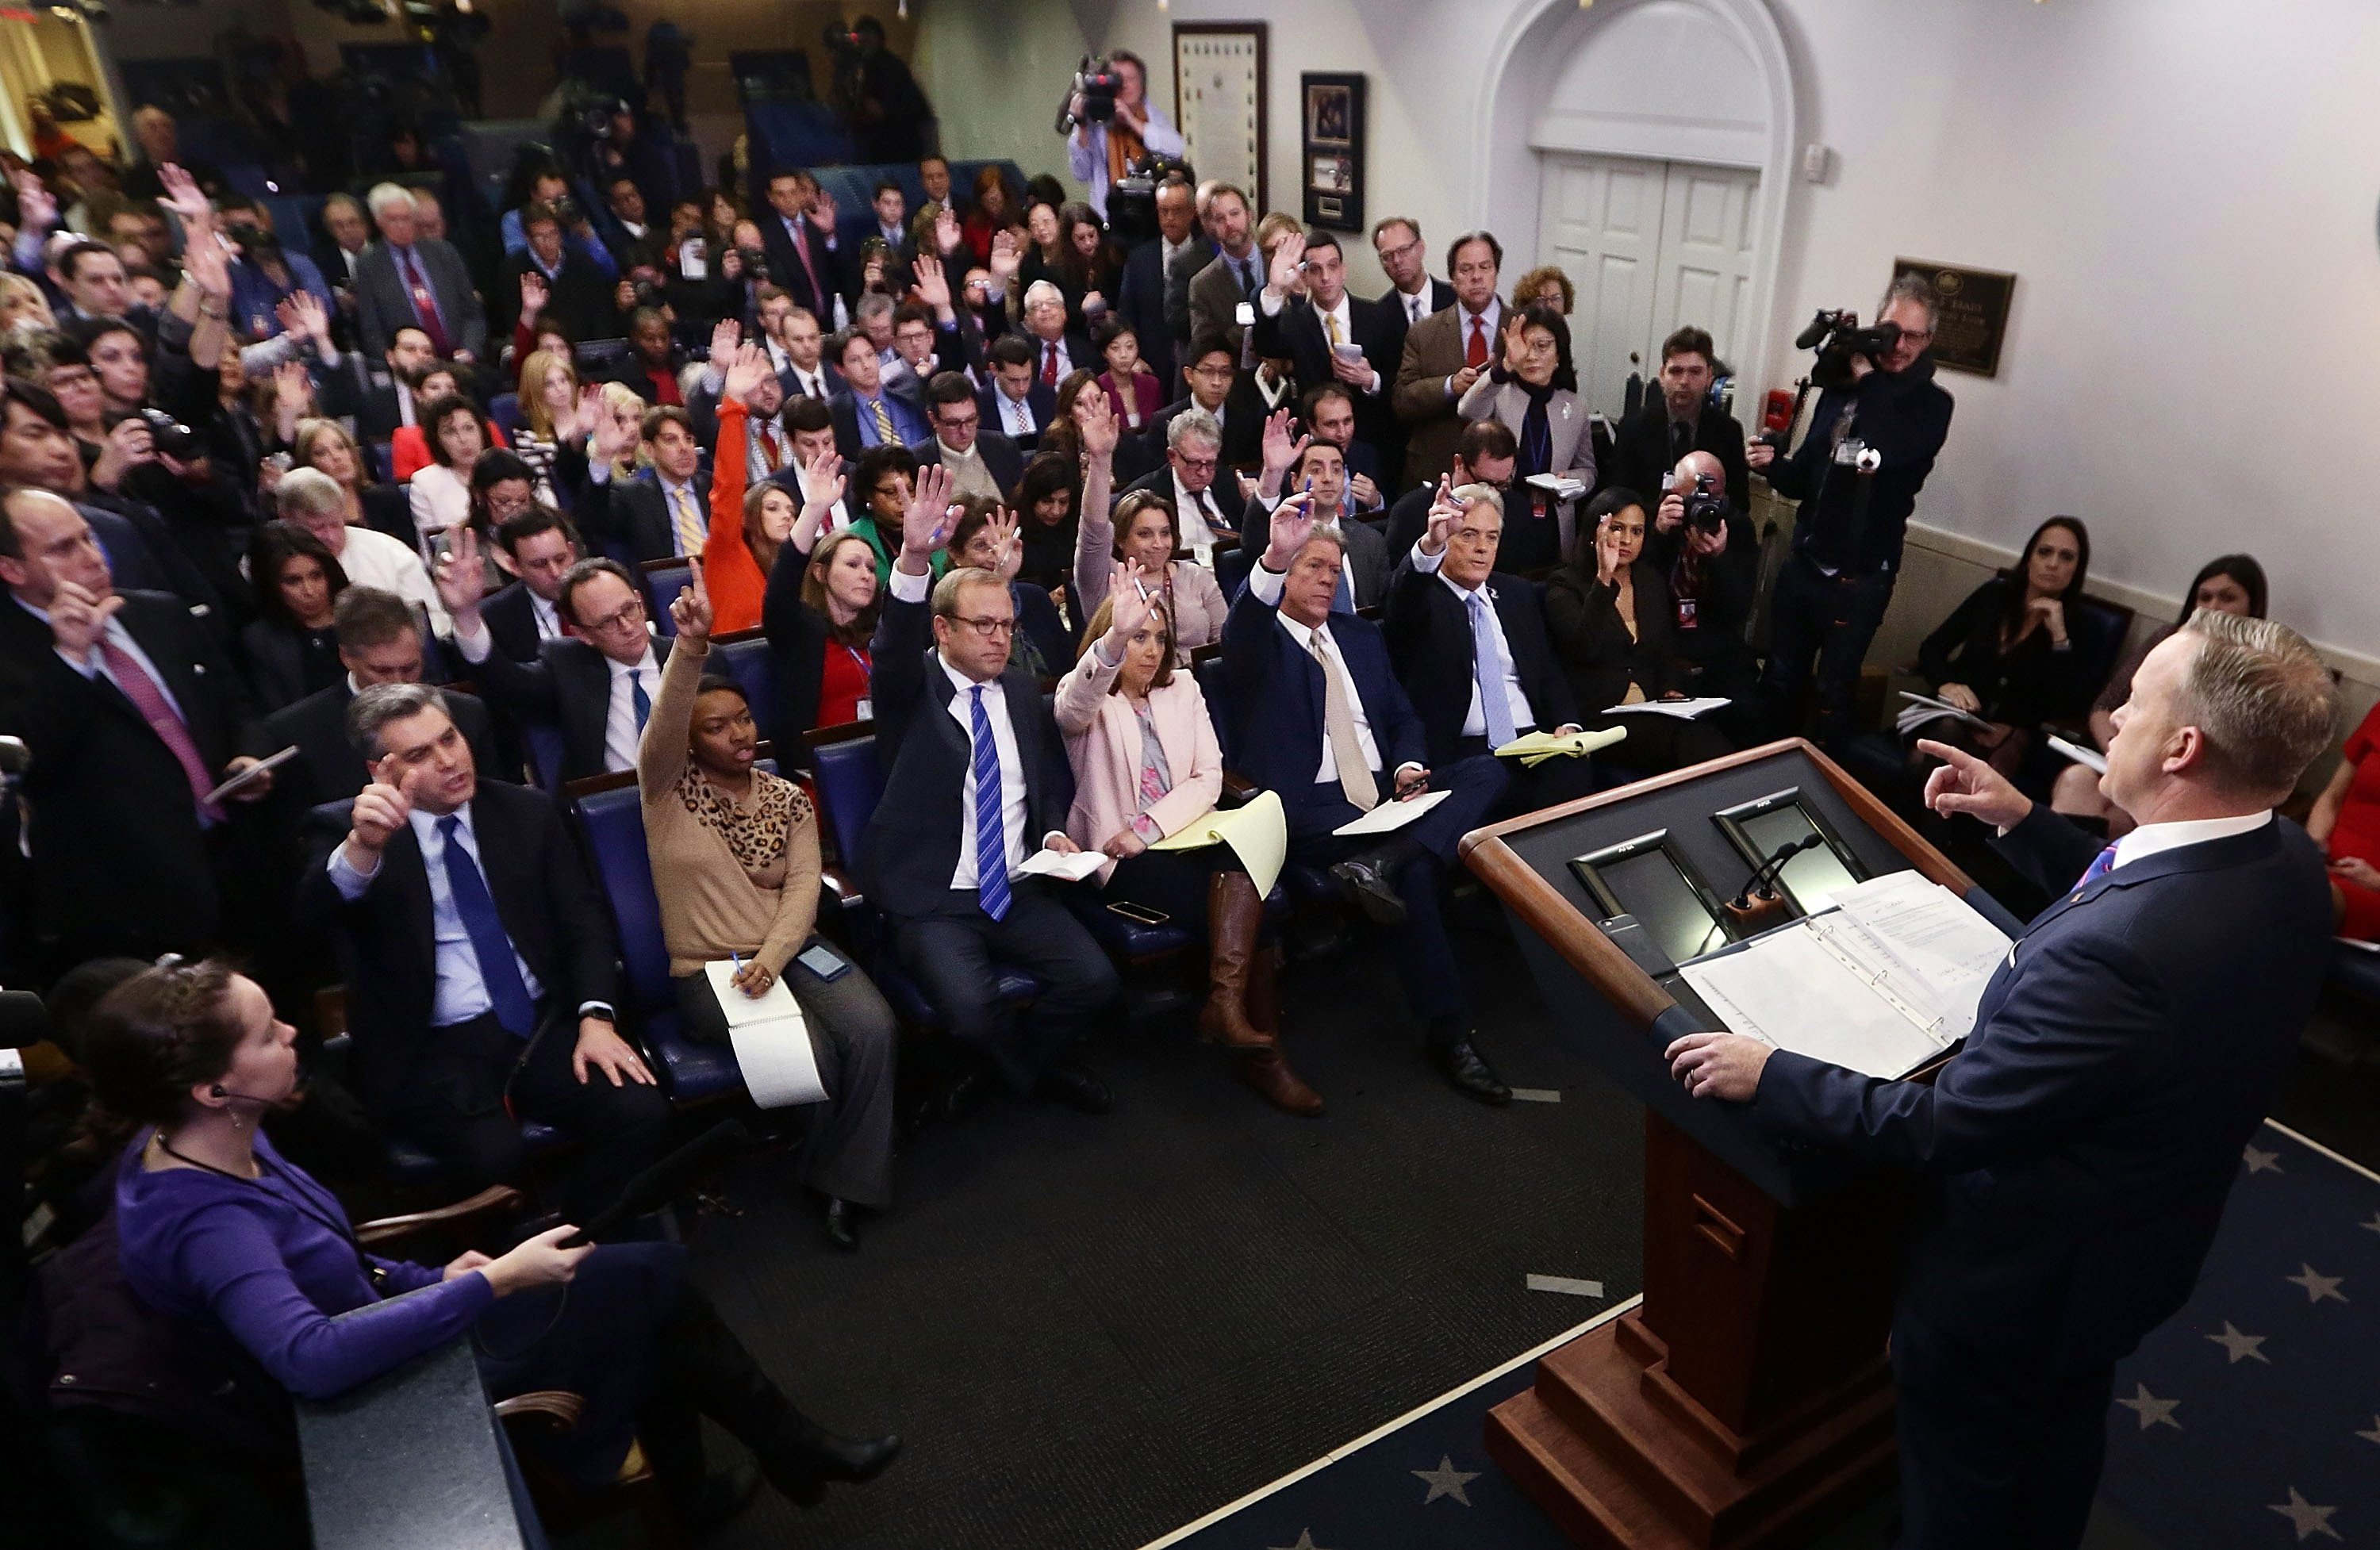 Reporters and broadcasters try to ask questions during White House press briefing. Photo by Alex Wong/Getty Images.